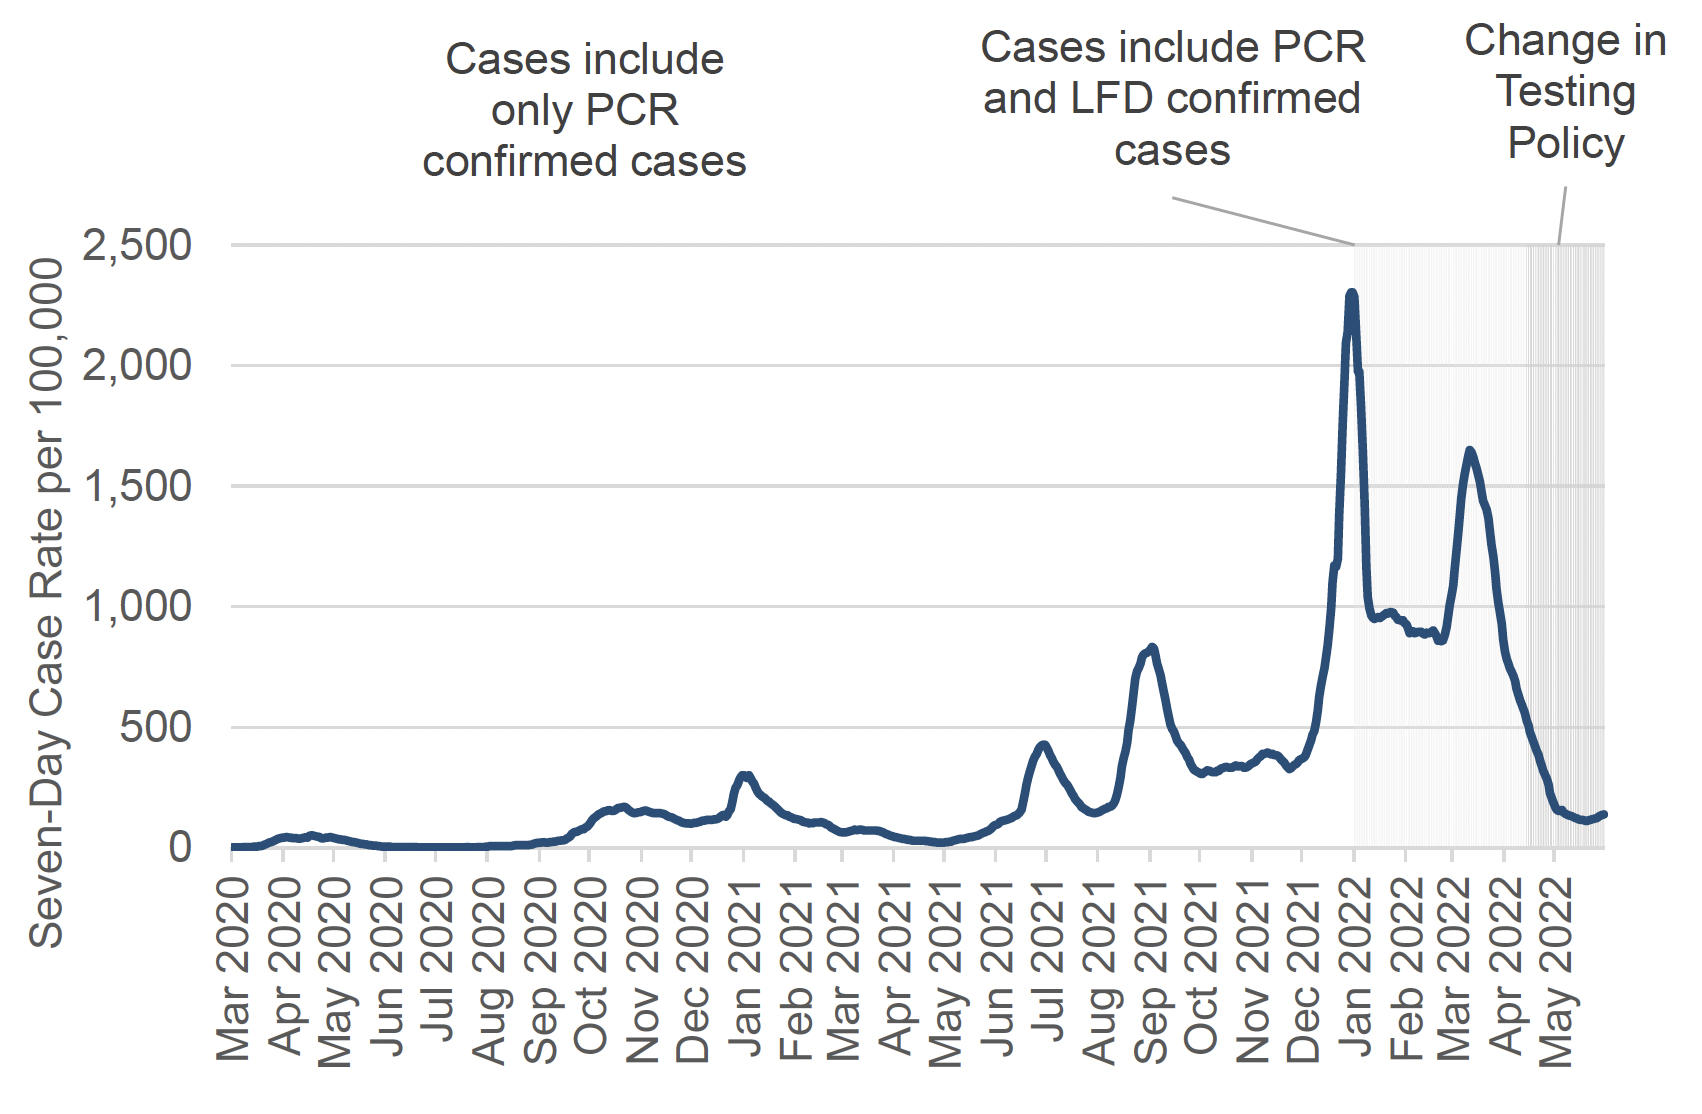 a line graph showing the seven-day case rate (including reinfections) by specimen date per 100,000 people in Scotland, using data from March 2020 up to and including early June 2022. In this period, weekly case rates have peaked in January 2021, July 2021, September 2021, early January 2022, and mid-March 2022. The chart has notes explaining that before 5 January 2022, the case rate includes only positive laboratory confirmed PCR tests. After 5 January 2022, the case rate includes PCR and LFD confirmed cases. From 1 May 2022, there is a change in Testing Policy meaning the purpose of COVID-19 testing shifted from population-wide testing to reduce transmission, to targeted testing and surveillance.